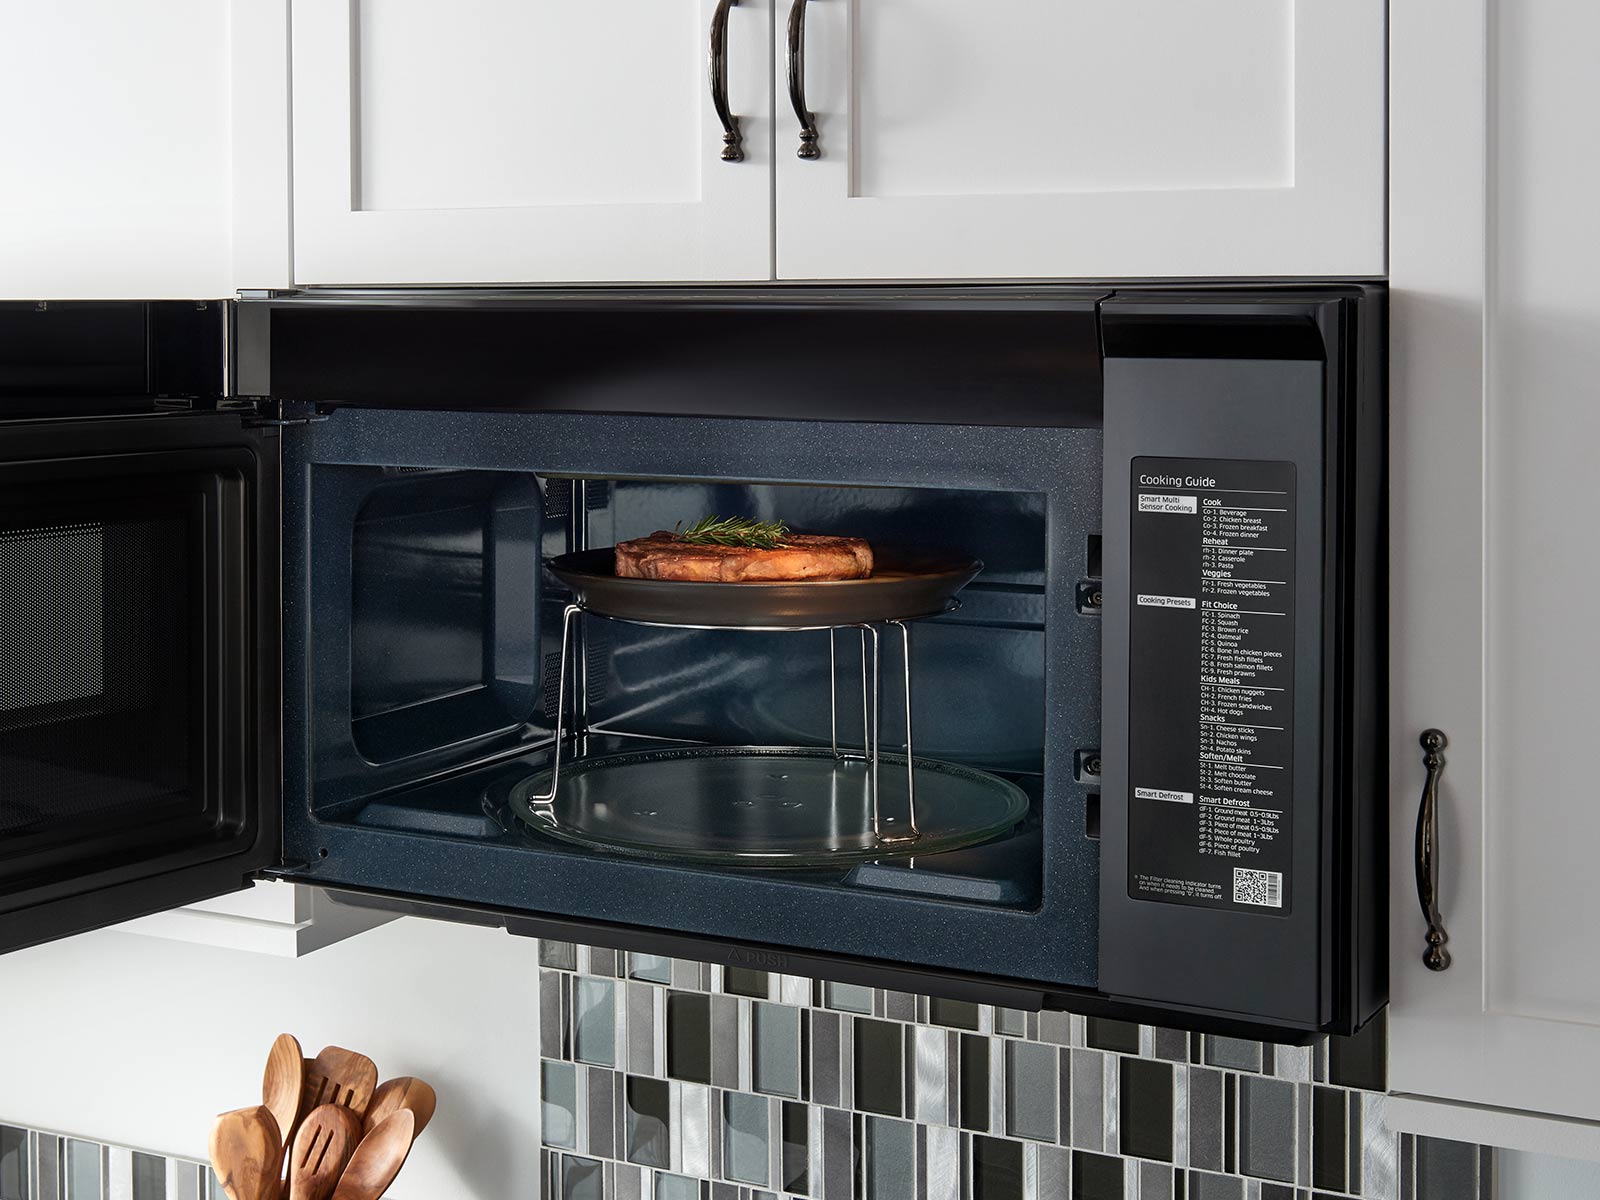 Thumbnail image of 2.1 cu. ft. Over-the-Range Microwave with PowerGrill in Fingerprint Resistant Black Stainless Steel